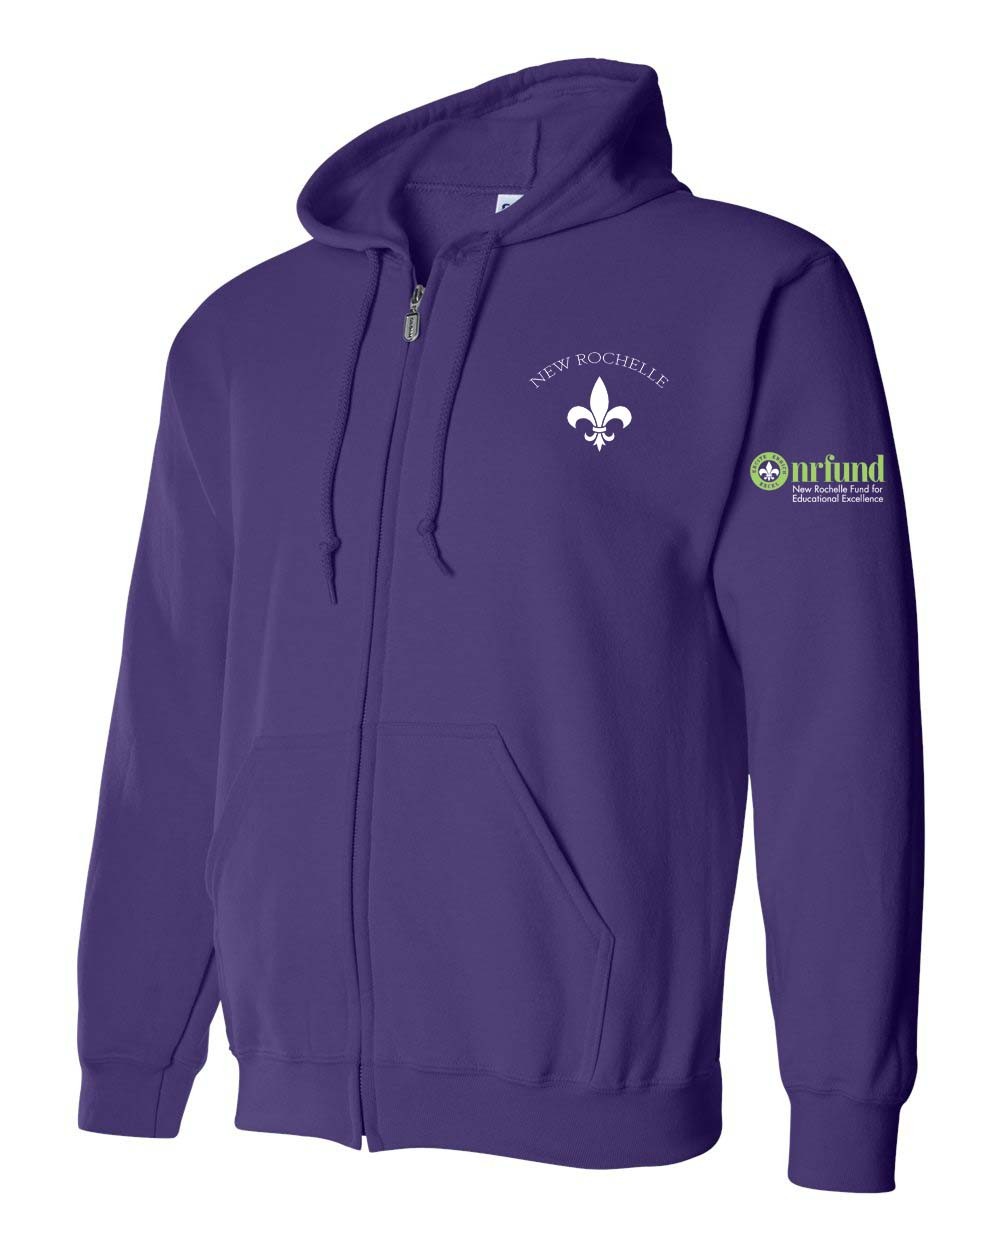 NR Fund Zipper Hoodie w/ Logo - Please allow 2-3 Weeks for Delivery